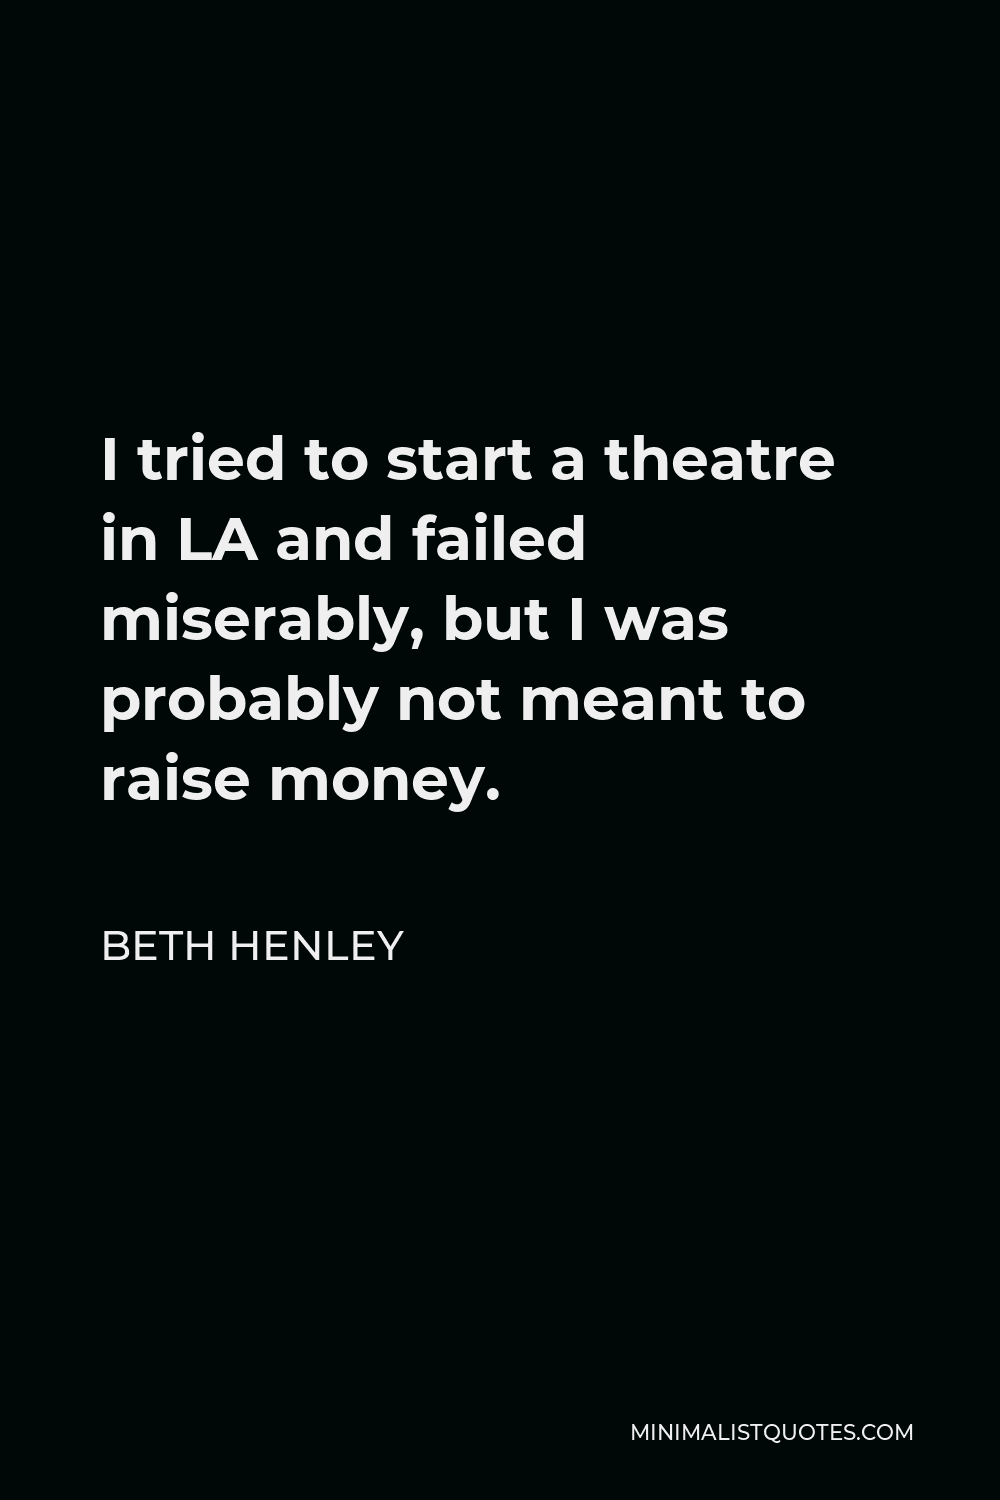 Beth Henley Quote - I tried to start a theatre in LA and failed miserably, but I was probably not meant to raise money.